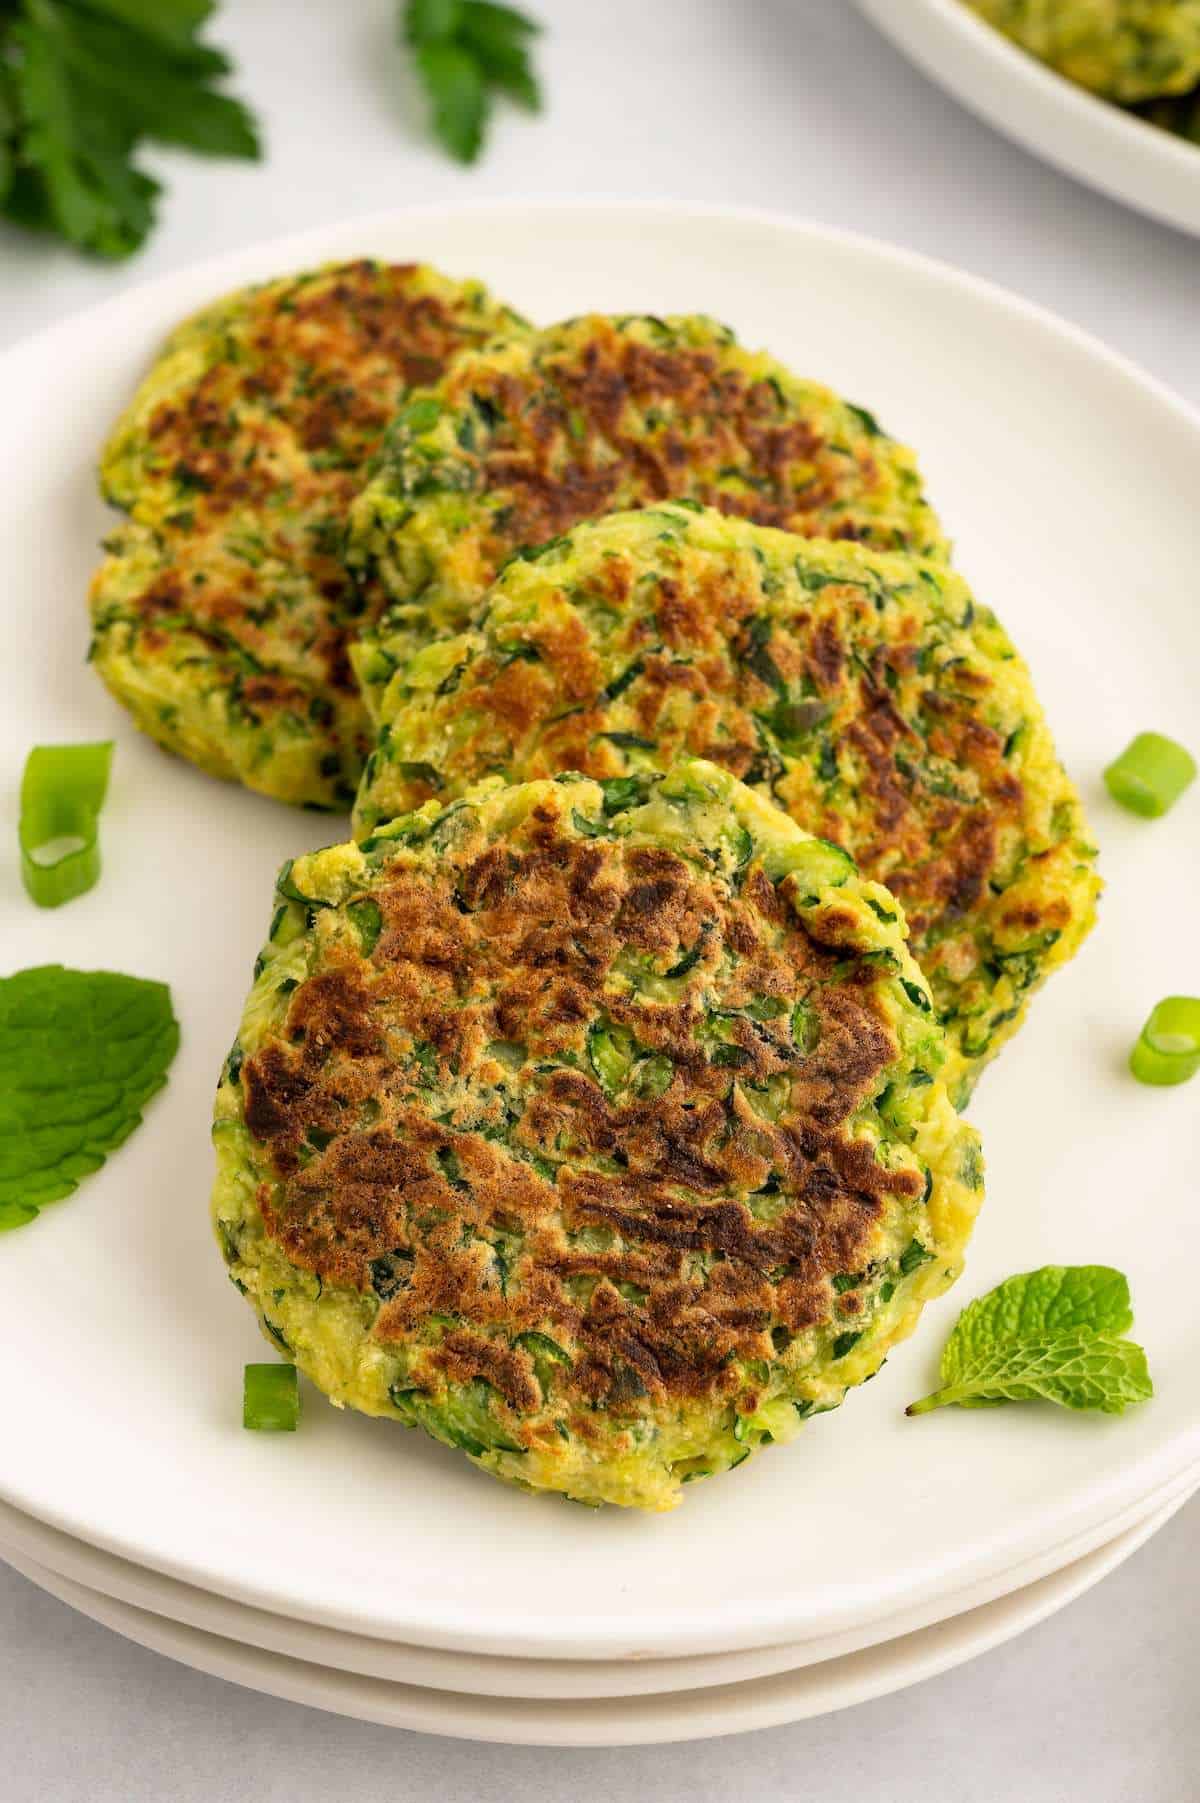 Four vegan zucchini fritters overlapping in a line on a plate.